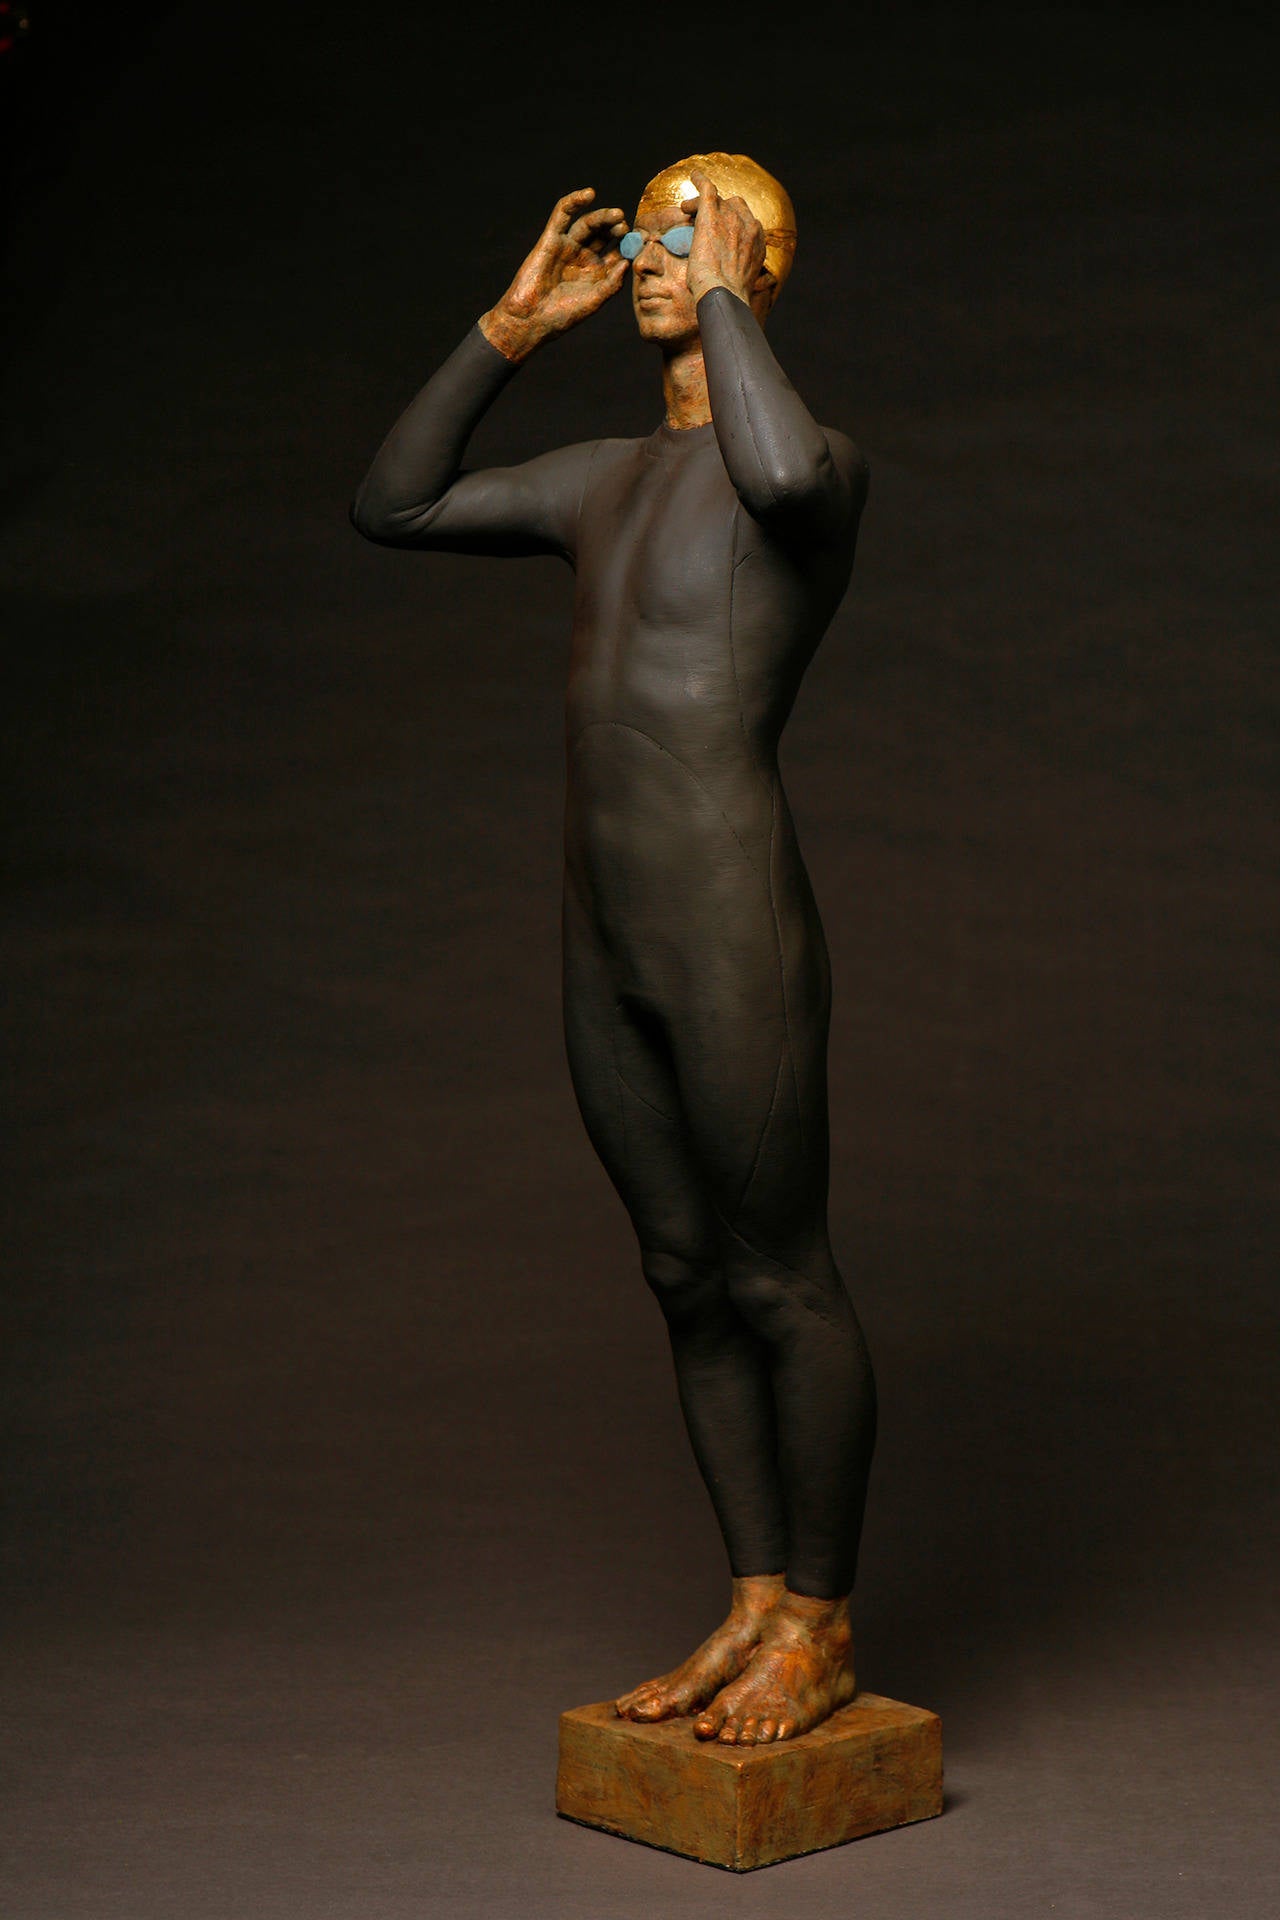 Swimmer or triathlete sculpture in bronze.
Dimensions: 34 x 4 1/2 x 5 1/2 in.

Sculptor Deon Duncan received her MFA from The School of the Art Institute in Chicago. She worked in inner-city Chicago with 